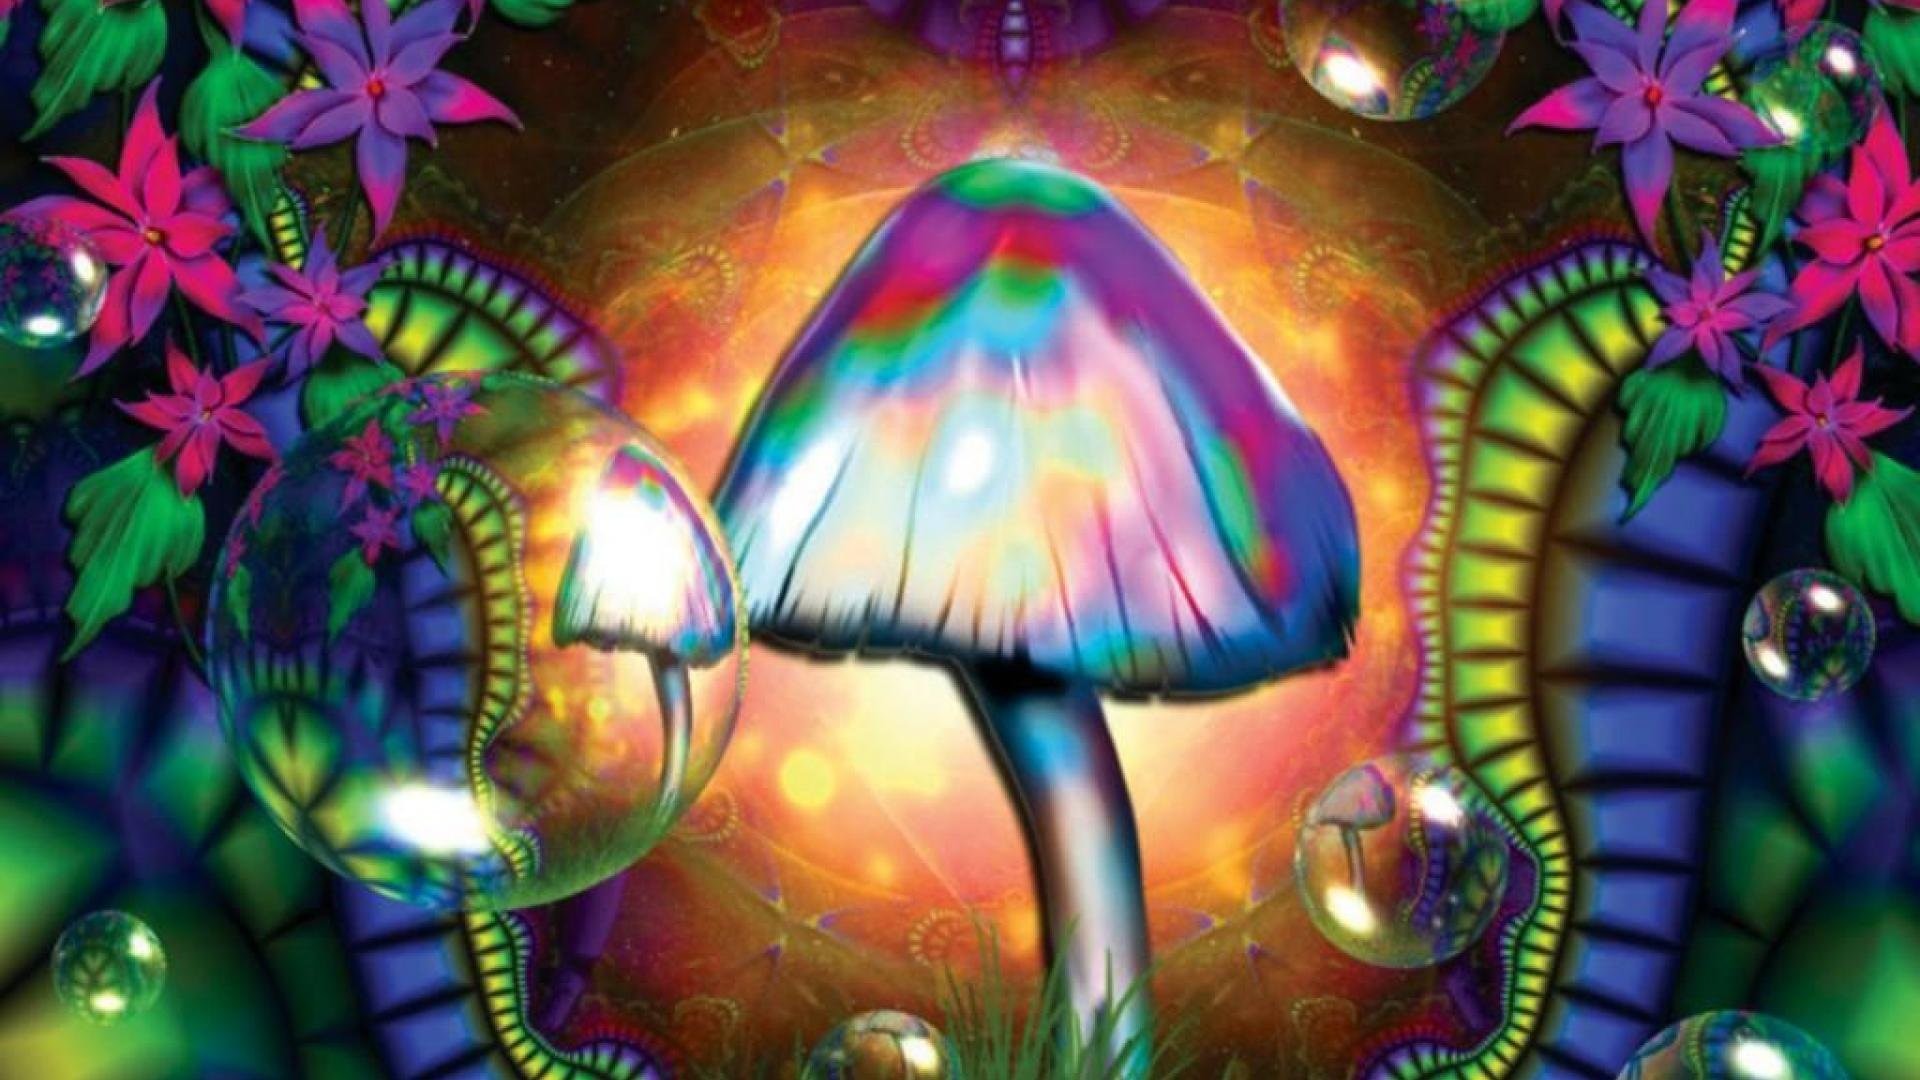 1920x1080 (1000+) Trippy Wallpapers & Psychedelic Backgrounds HD 2017